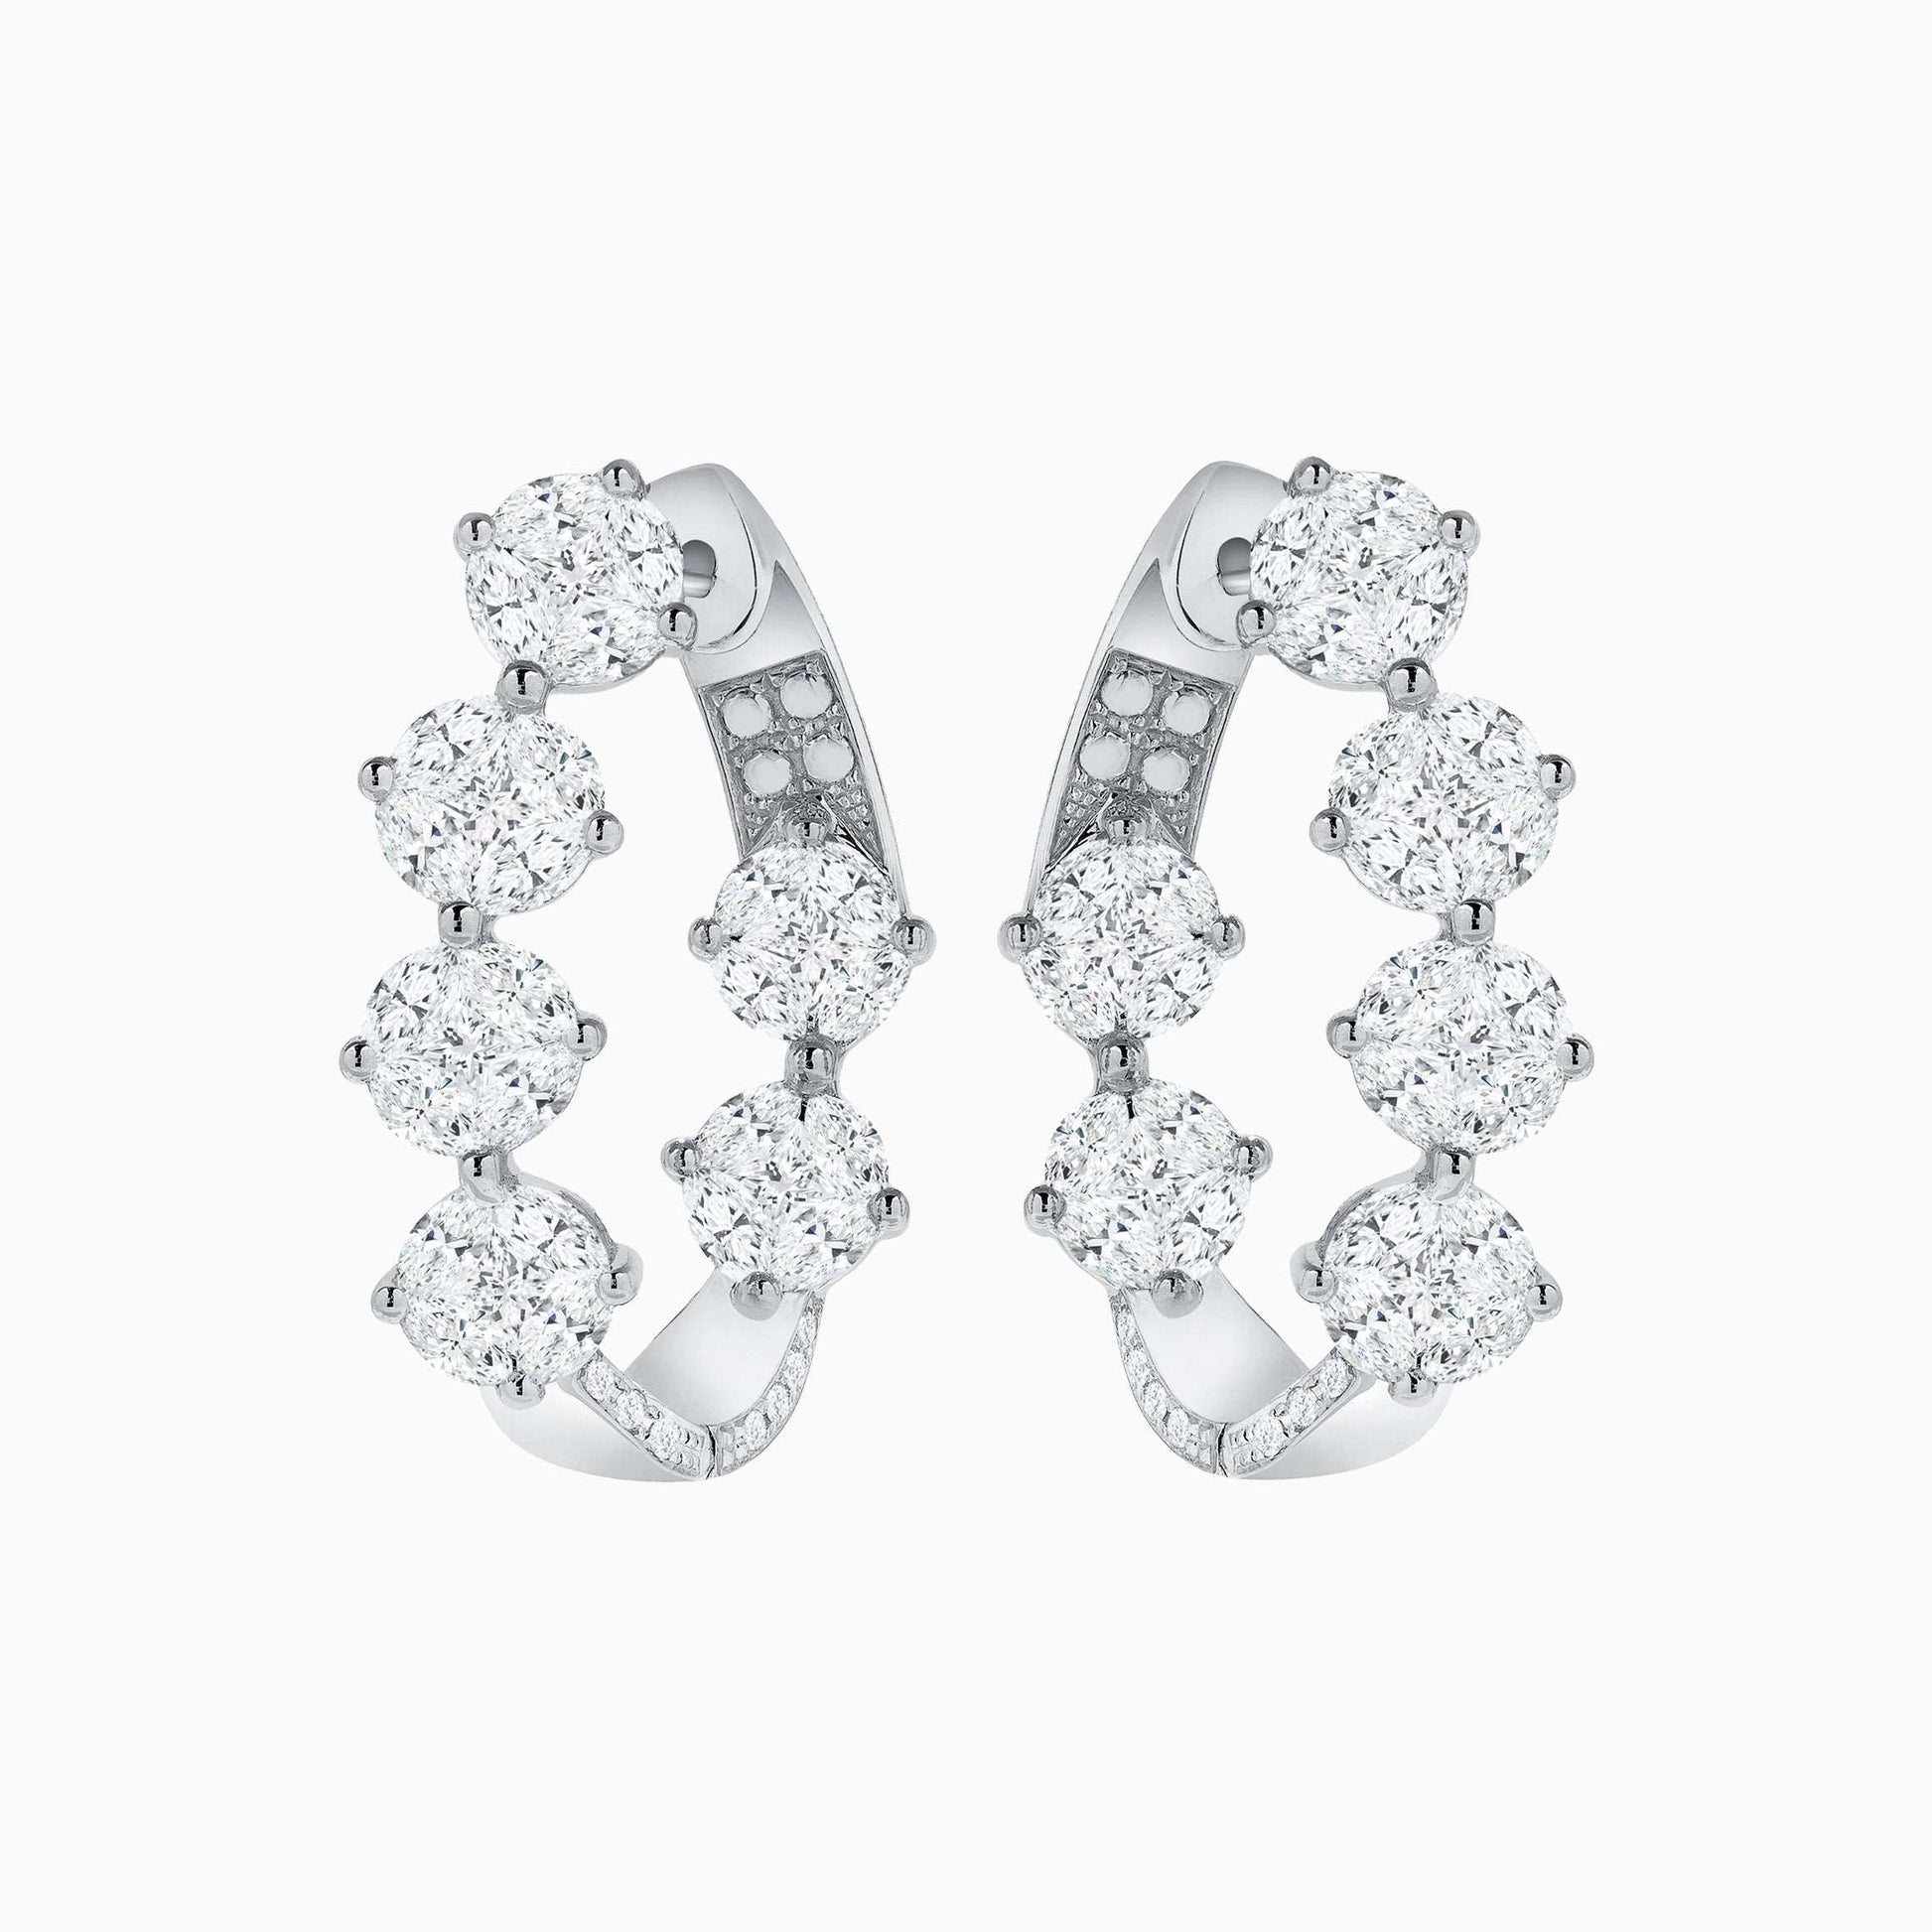 Pair of Illusion Set Diamond White Gold Hoop Earrings on a white background